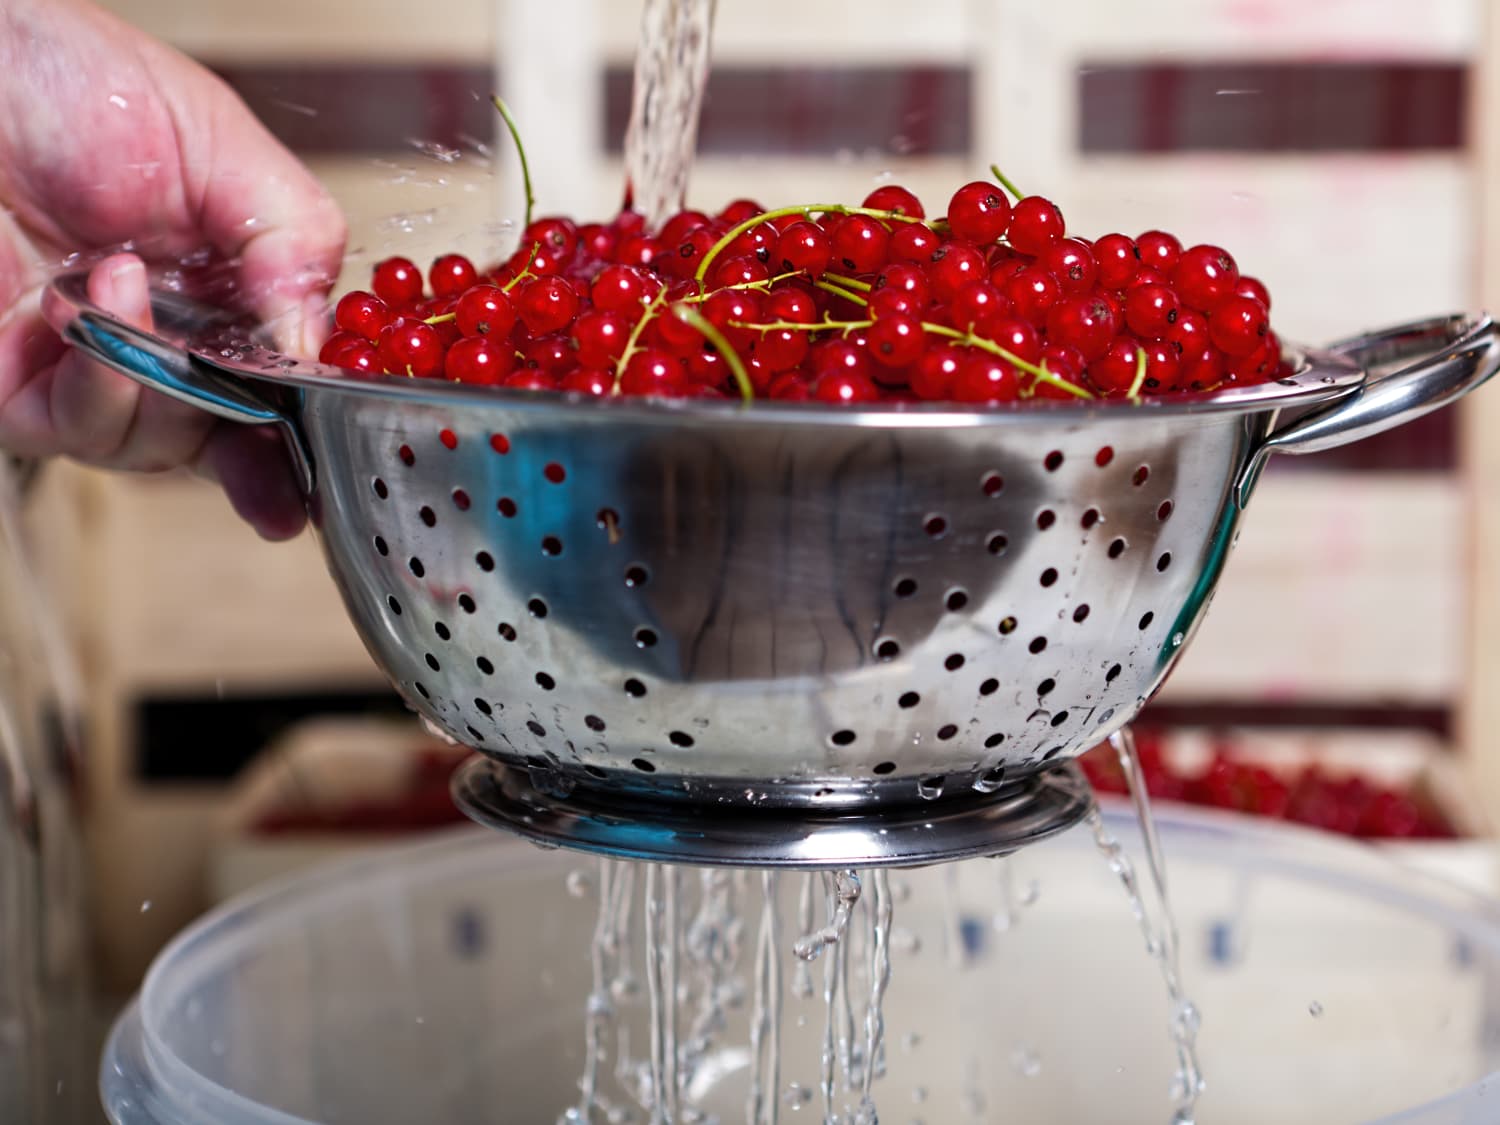 Colander Review: A Must-Have Kitchen Tool for Efficient Straining